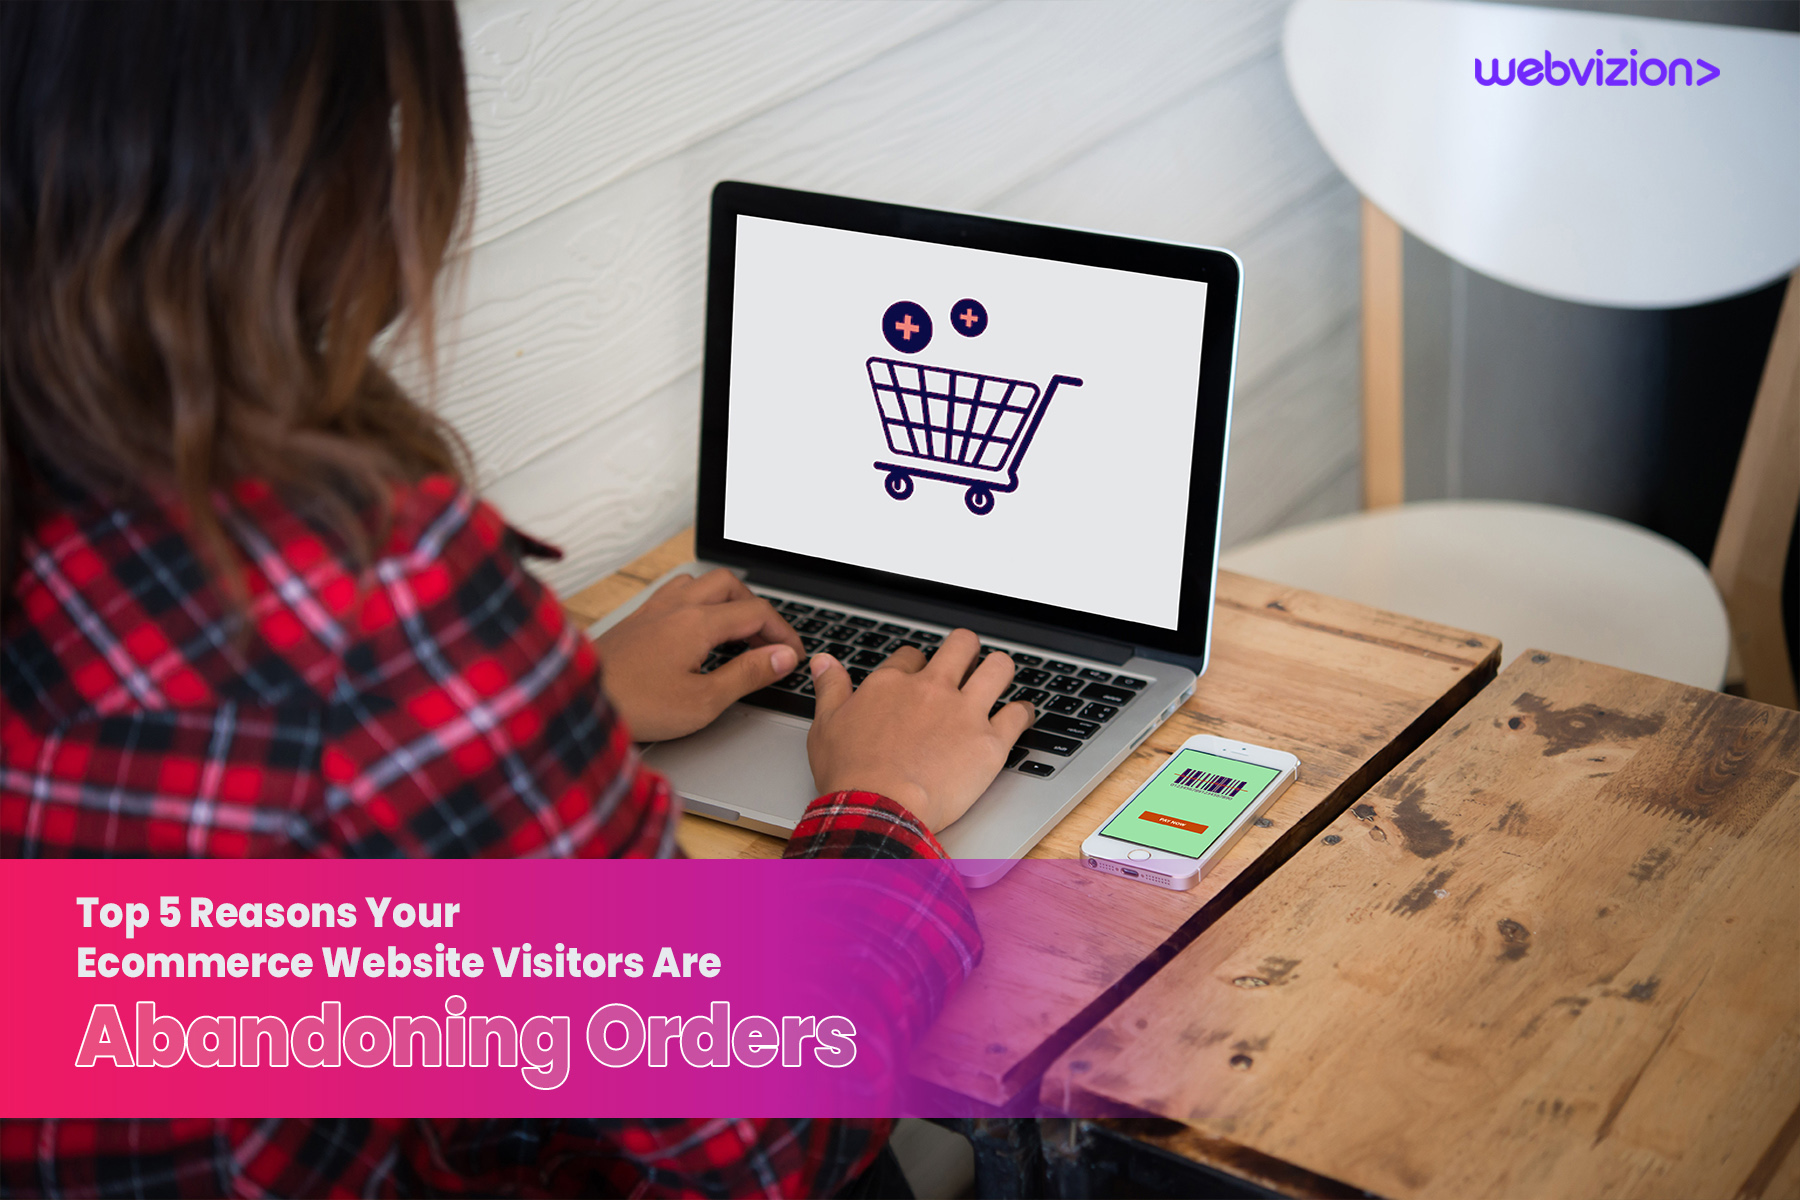 Top 5 Reasons Your Ecommerce Website Visitor Are Abandoning Orders-Webvizion Global